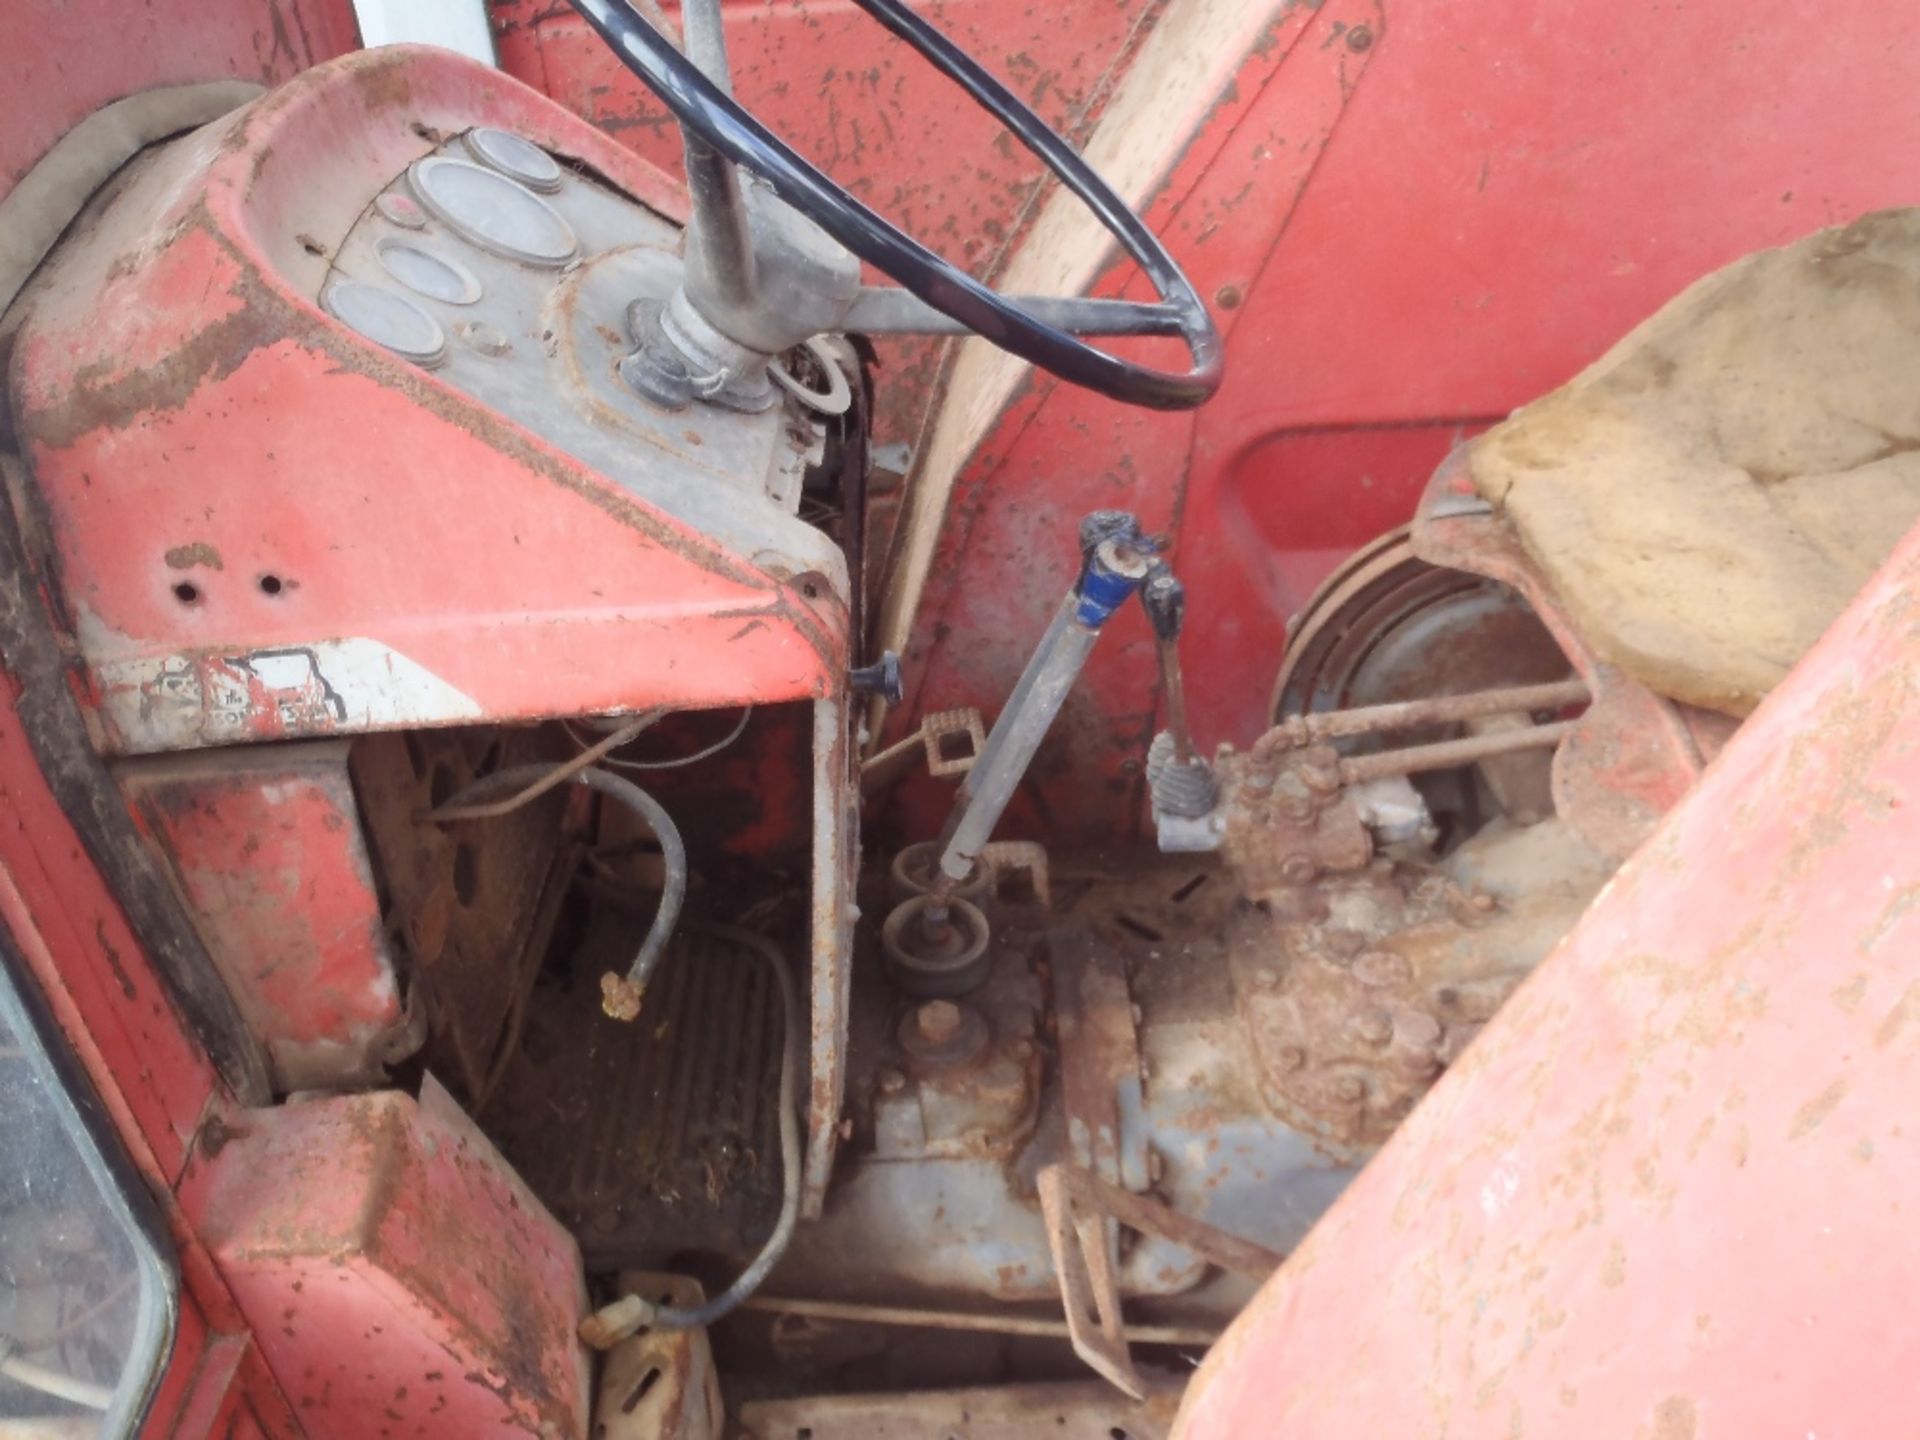 Massey Ferguson 165 2wd Tractor With 212 Engine, Cab & Power Steering - Image 8 of 8